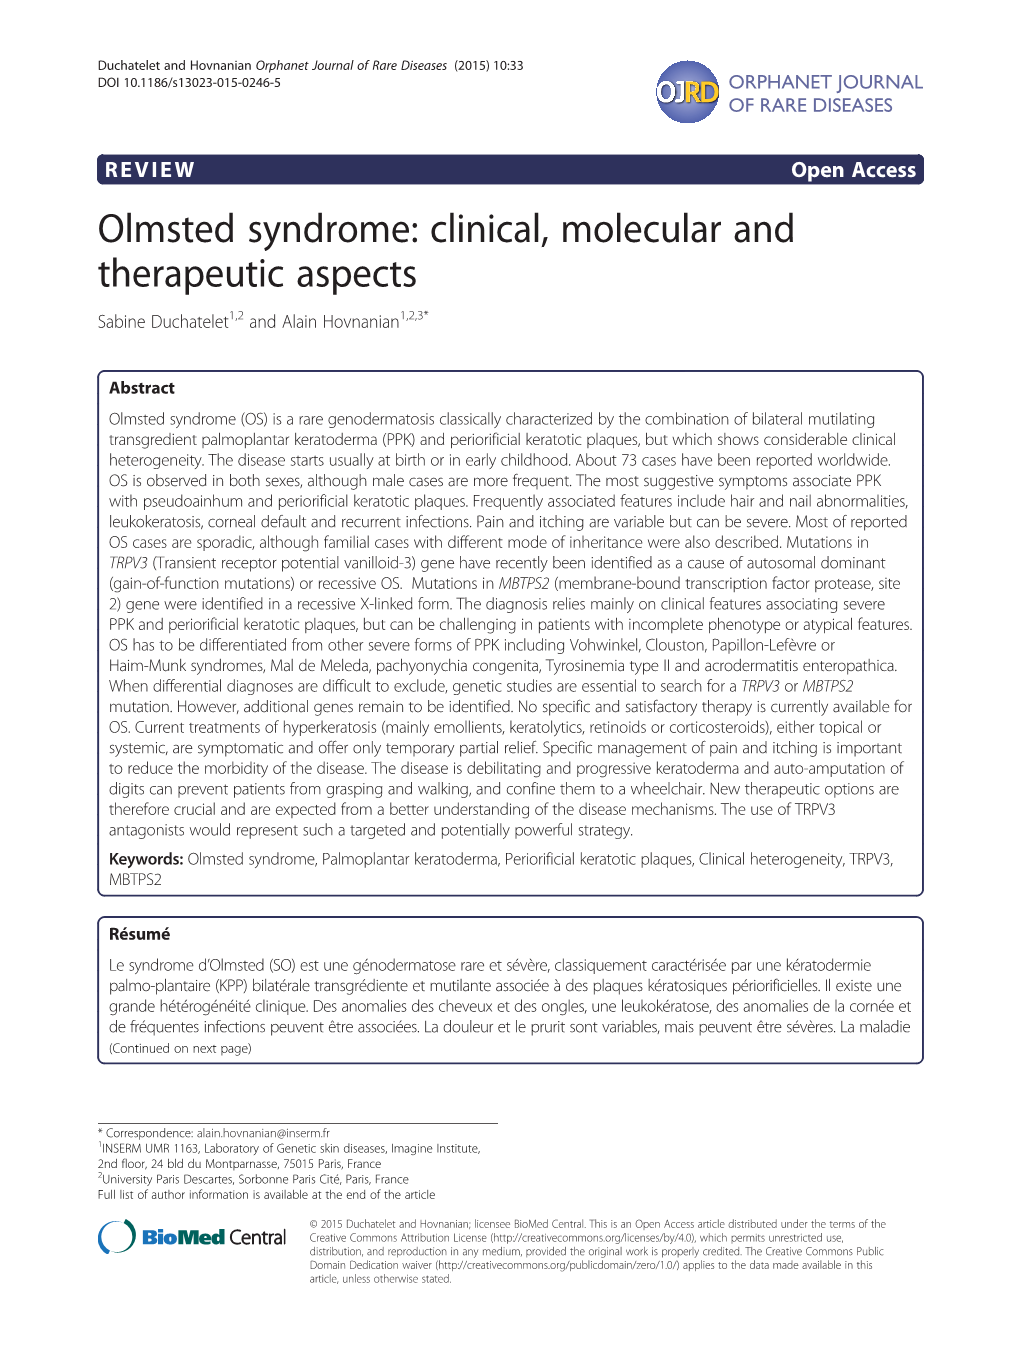 Olmsted Syndrome: Clinical, Molecular and Therapeutic Aspects Sabine Duchatelet1,2 and Alain Hovnanian1,2,3*